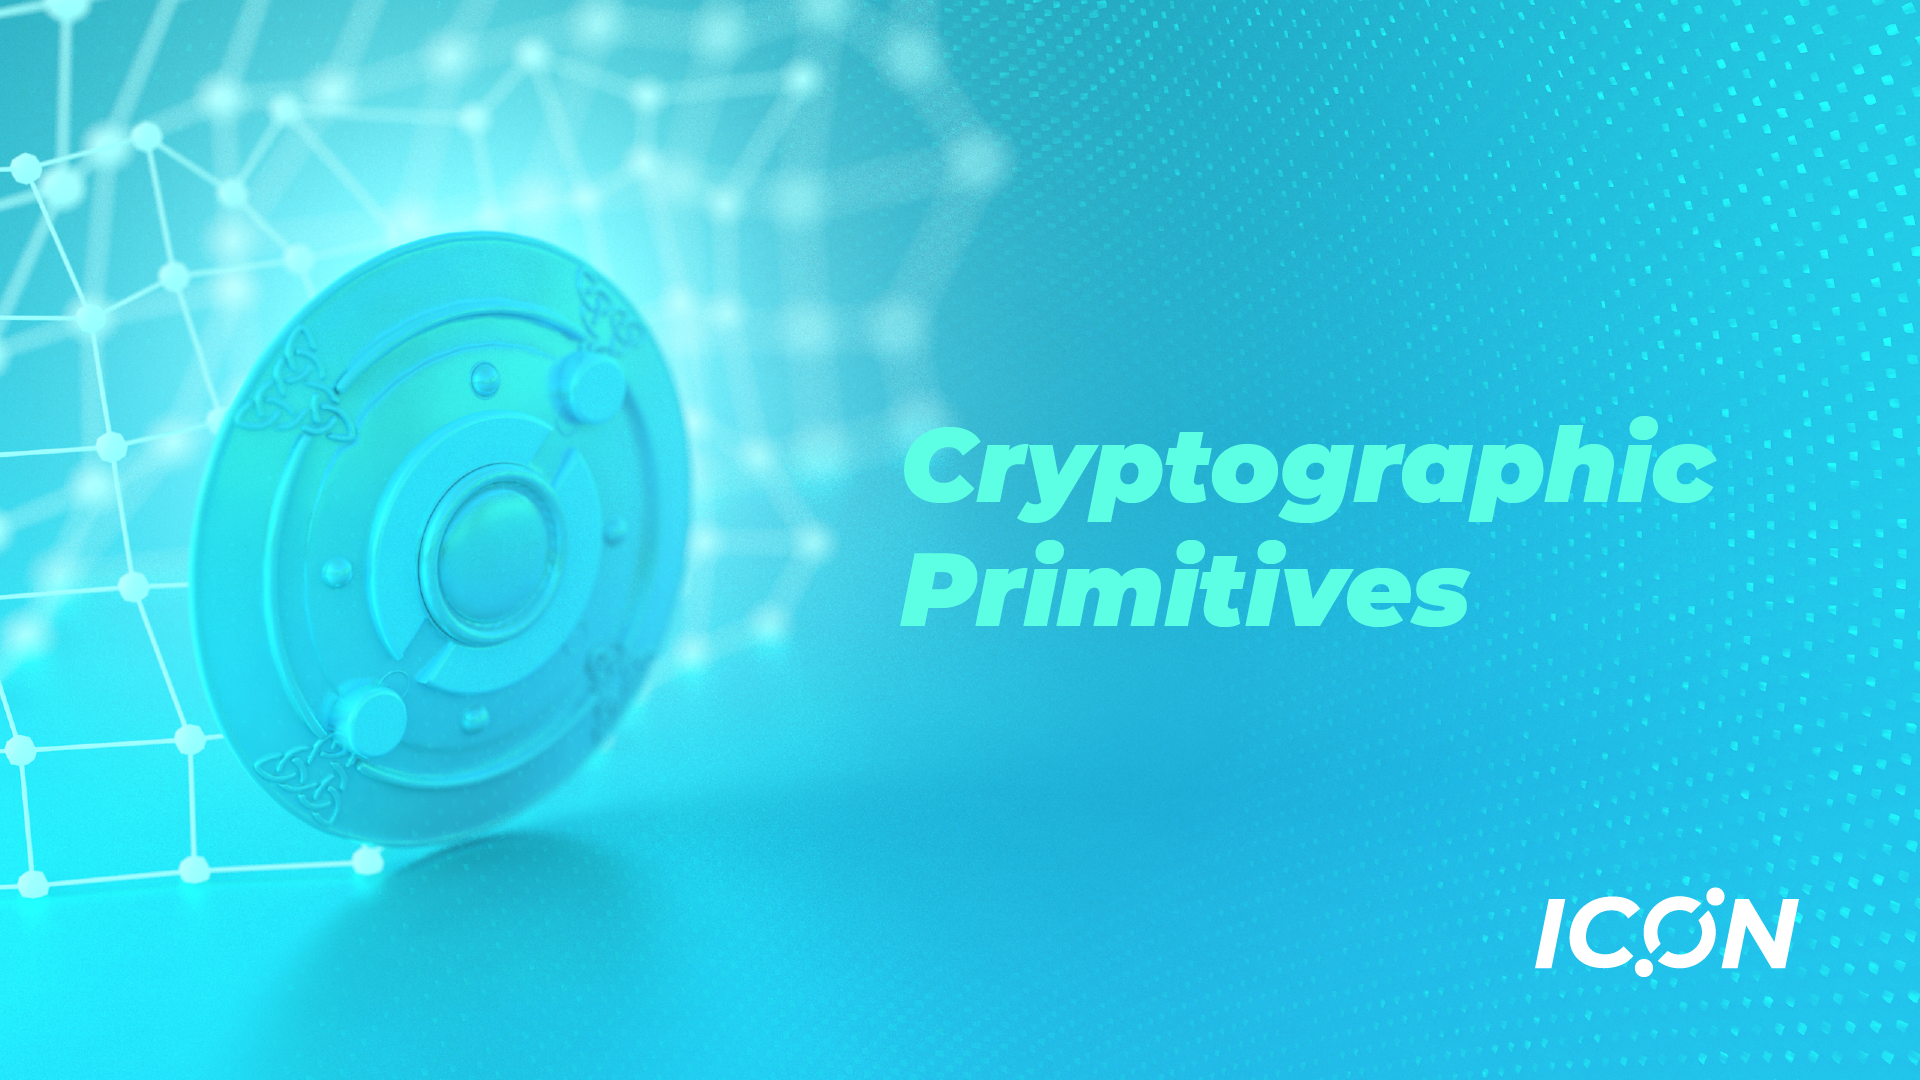 Cryptographic primitives are the foundation upon which more complex cryptographic algorithms and protocols are built. These primitives include functions such as encryption, decryption, digital signature, and key exchange.